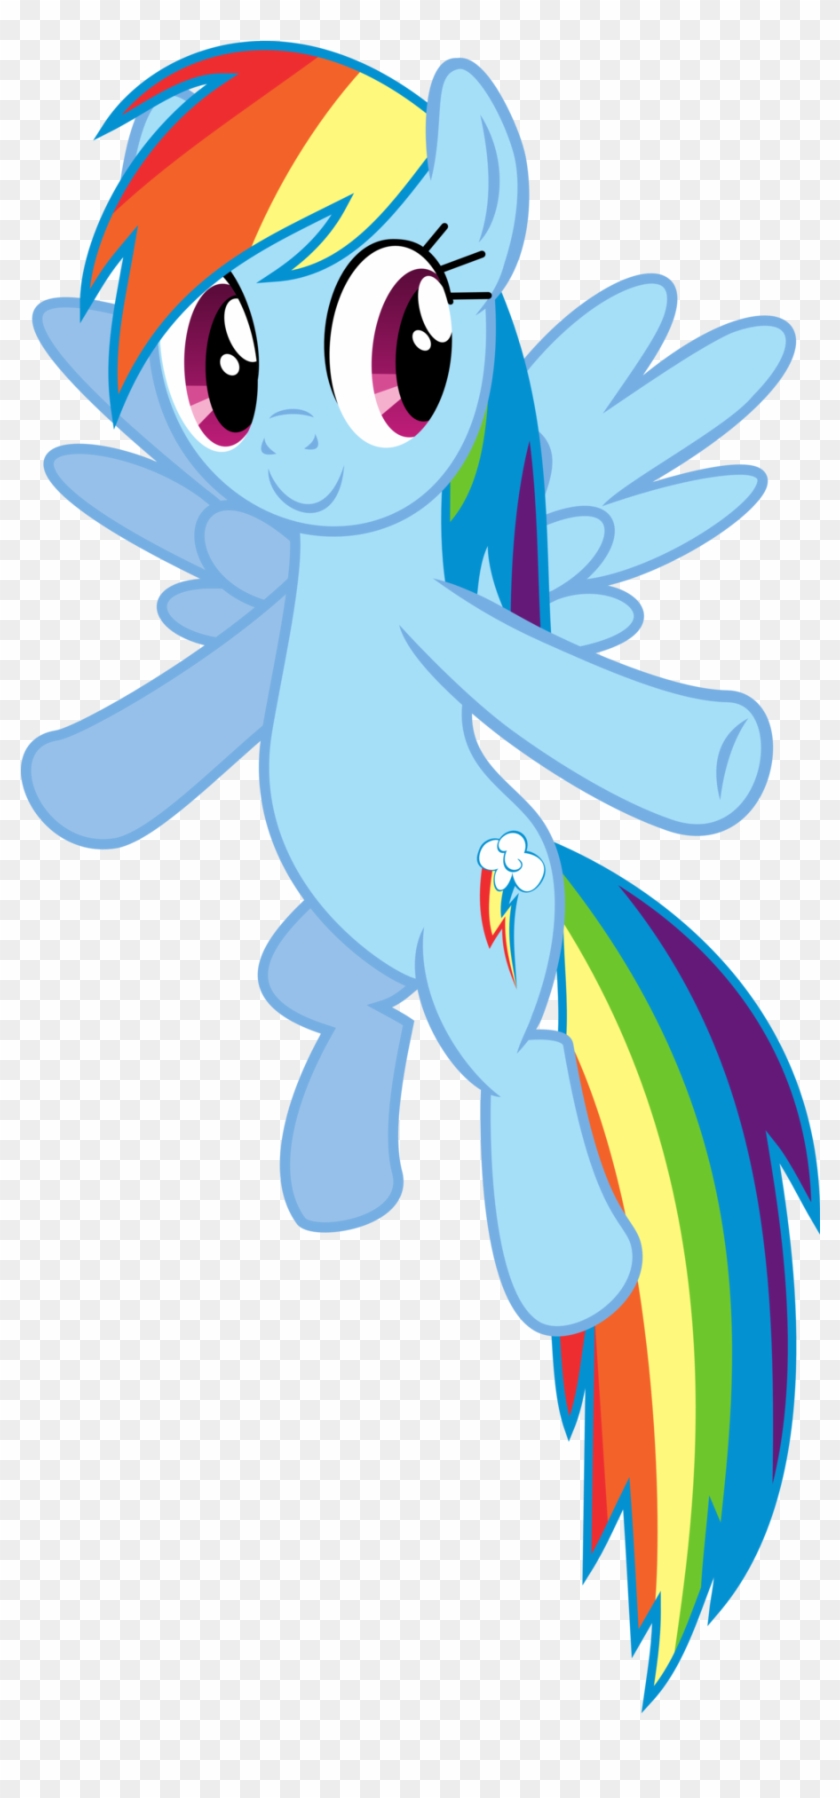 Awesome Flying Rainbow Dash Vector By Uxyd With My - Rainbow Dash Flying Png #650735